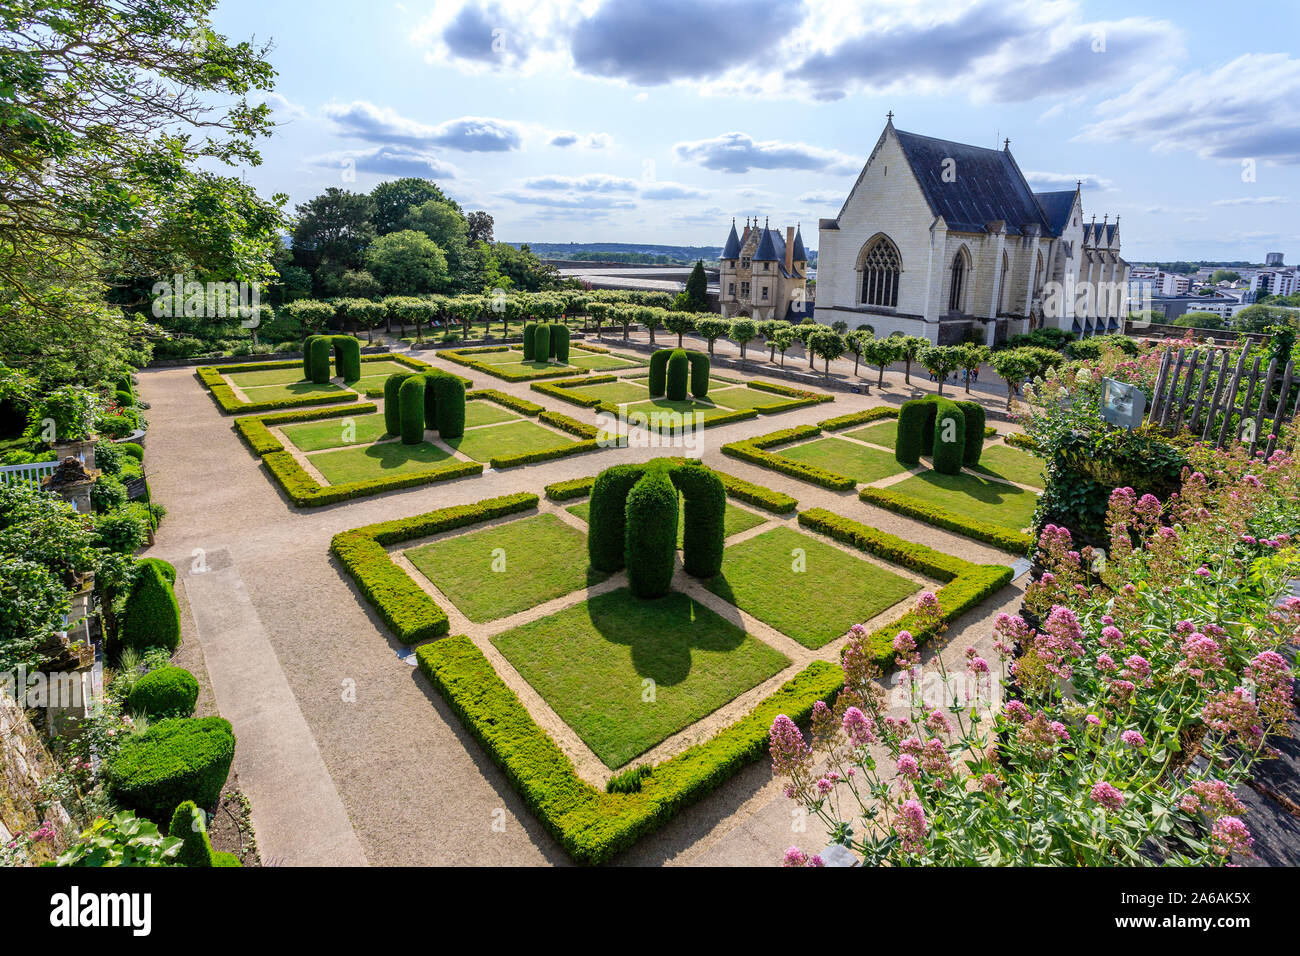 France, Maine et Loire, Angers, Chateau d’Angers, Angers castle, in the main courtyard, the chapel and the Regular garden with arches of carved yews a Stock Photo